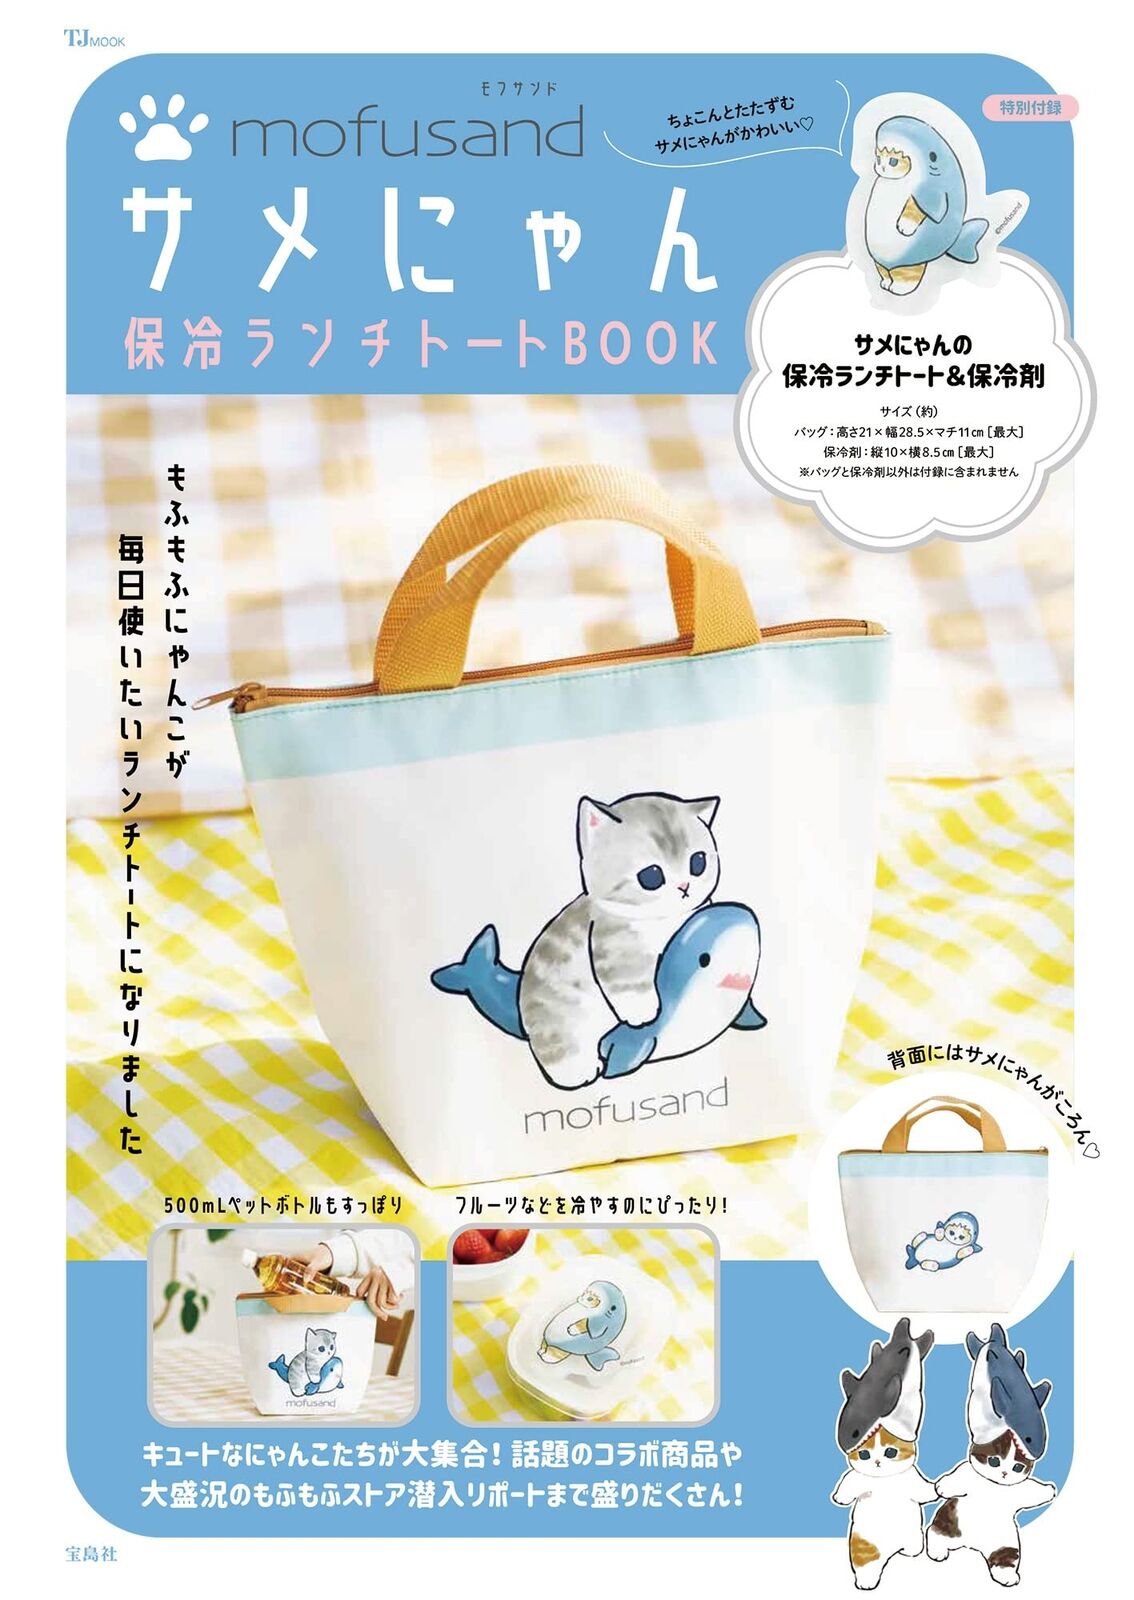 mofusand Shark Same Nyan Cold Insulated Lunch Tote Book TJMOOK Japan